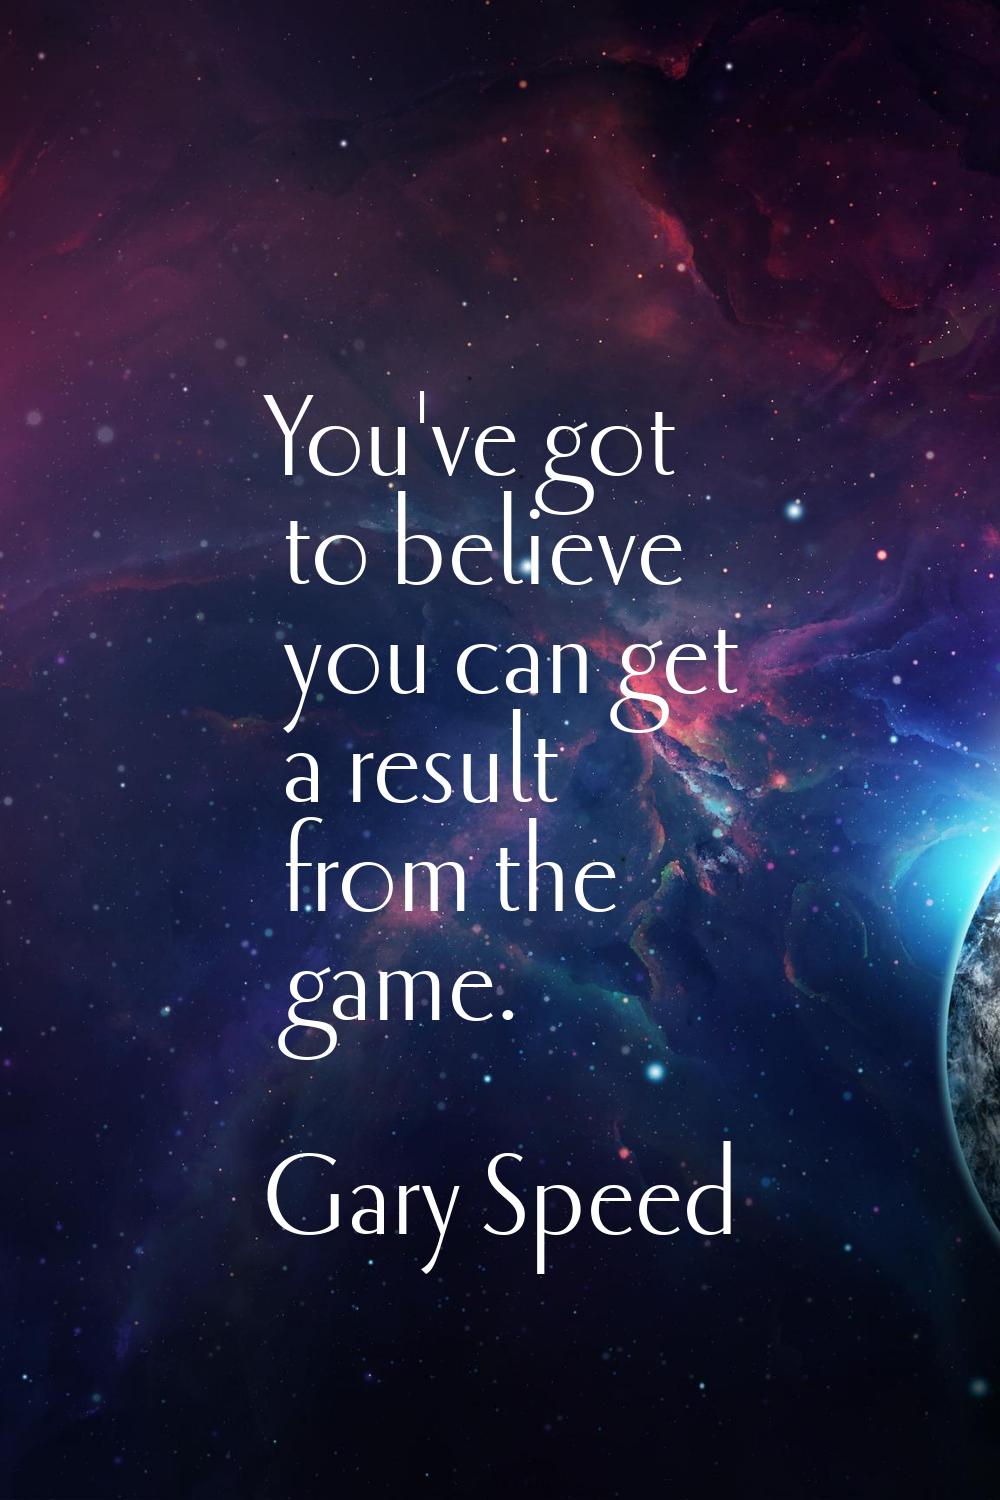 You've got to believe you can get a result from the game.